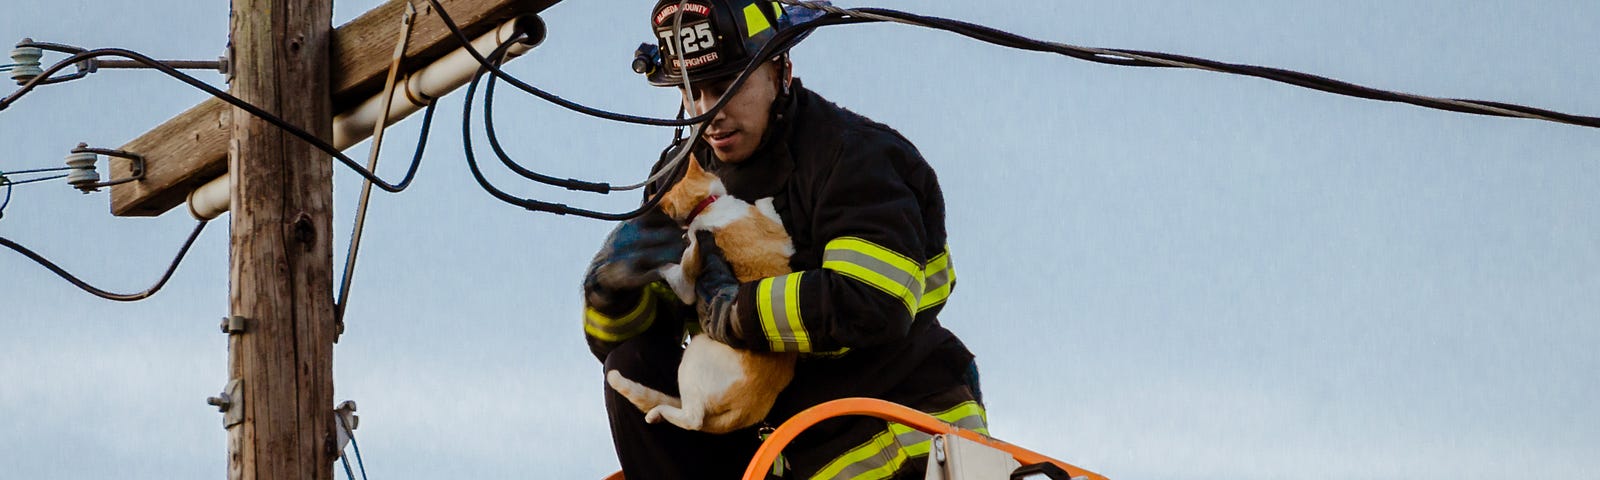 First Responder rescuing a kitten from a pole. First things first